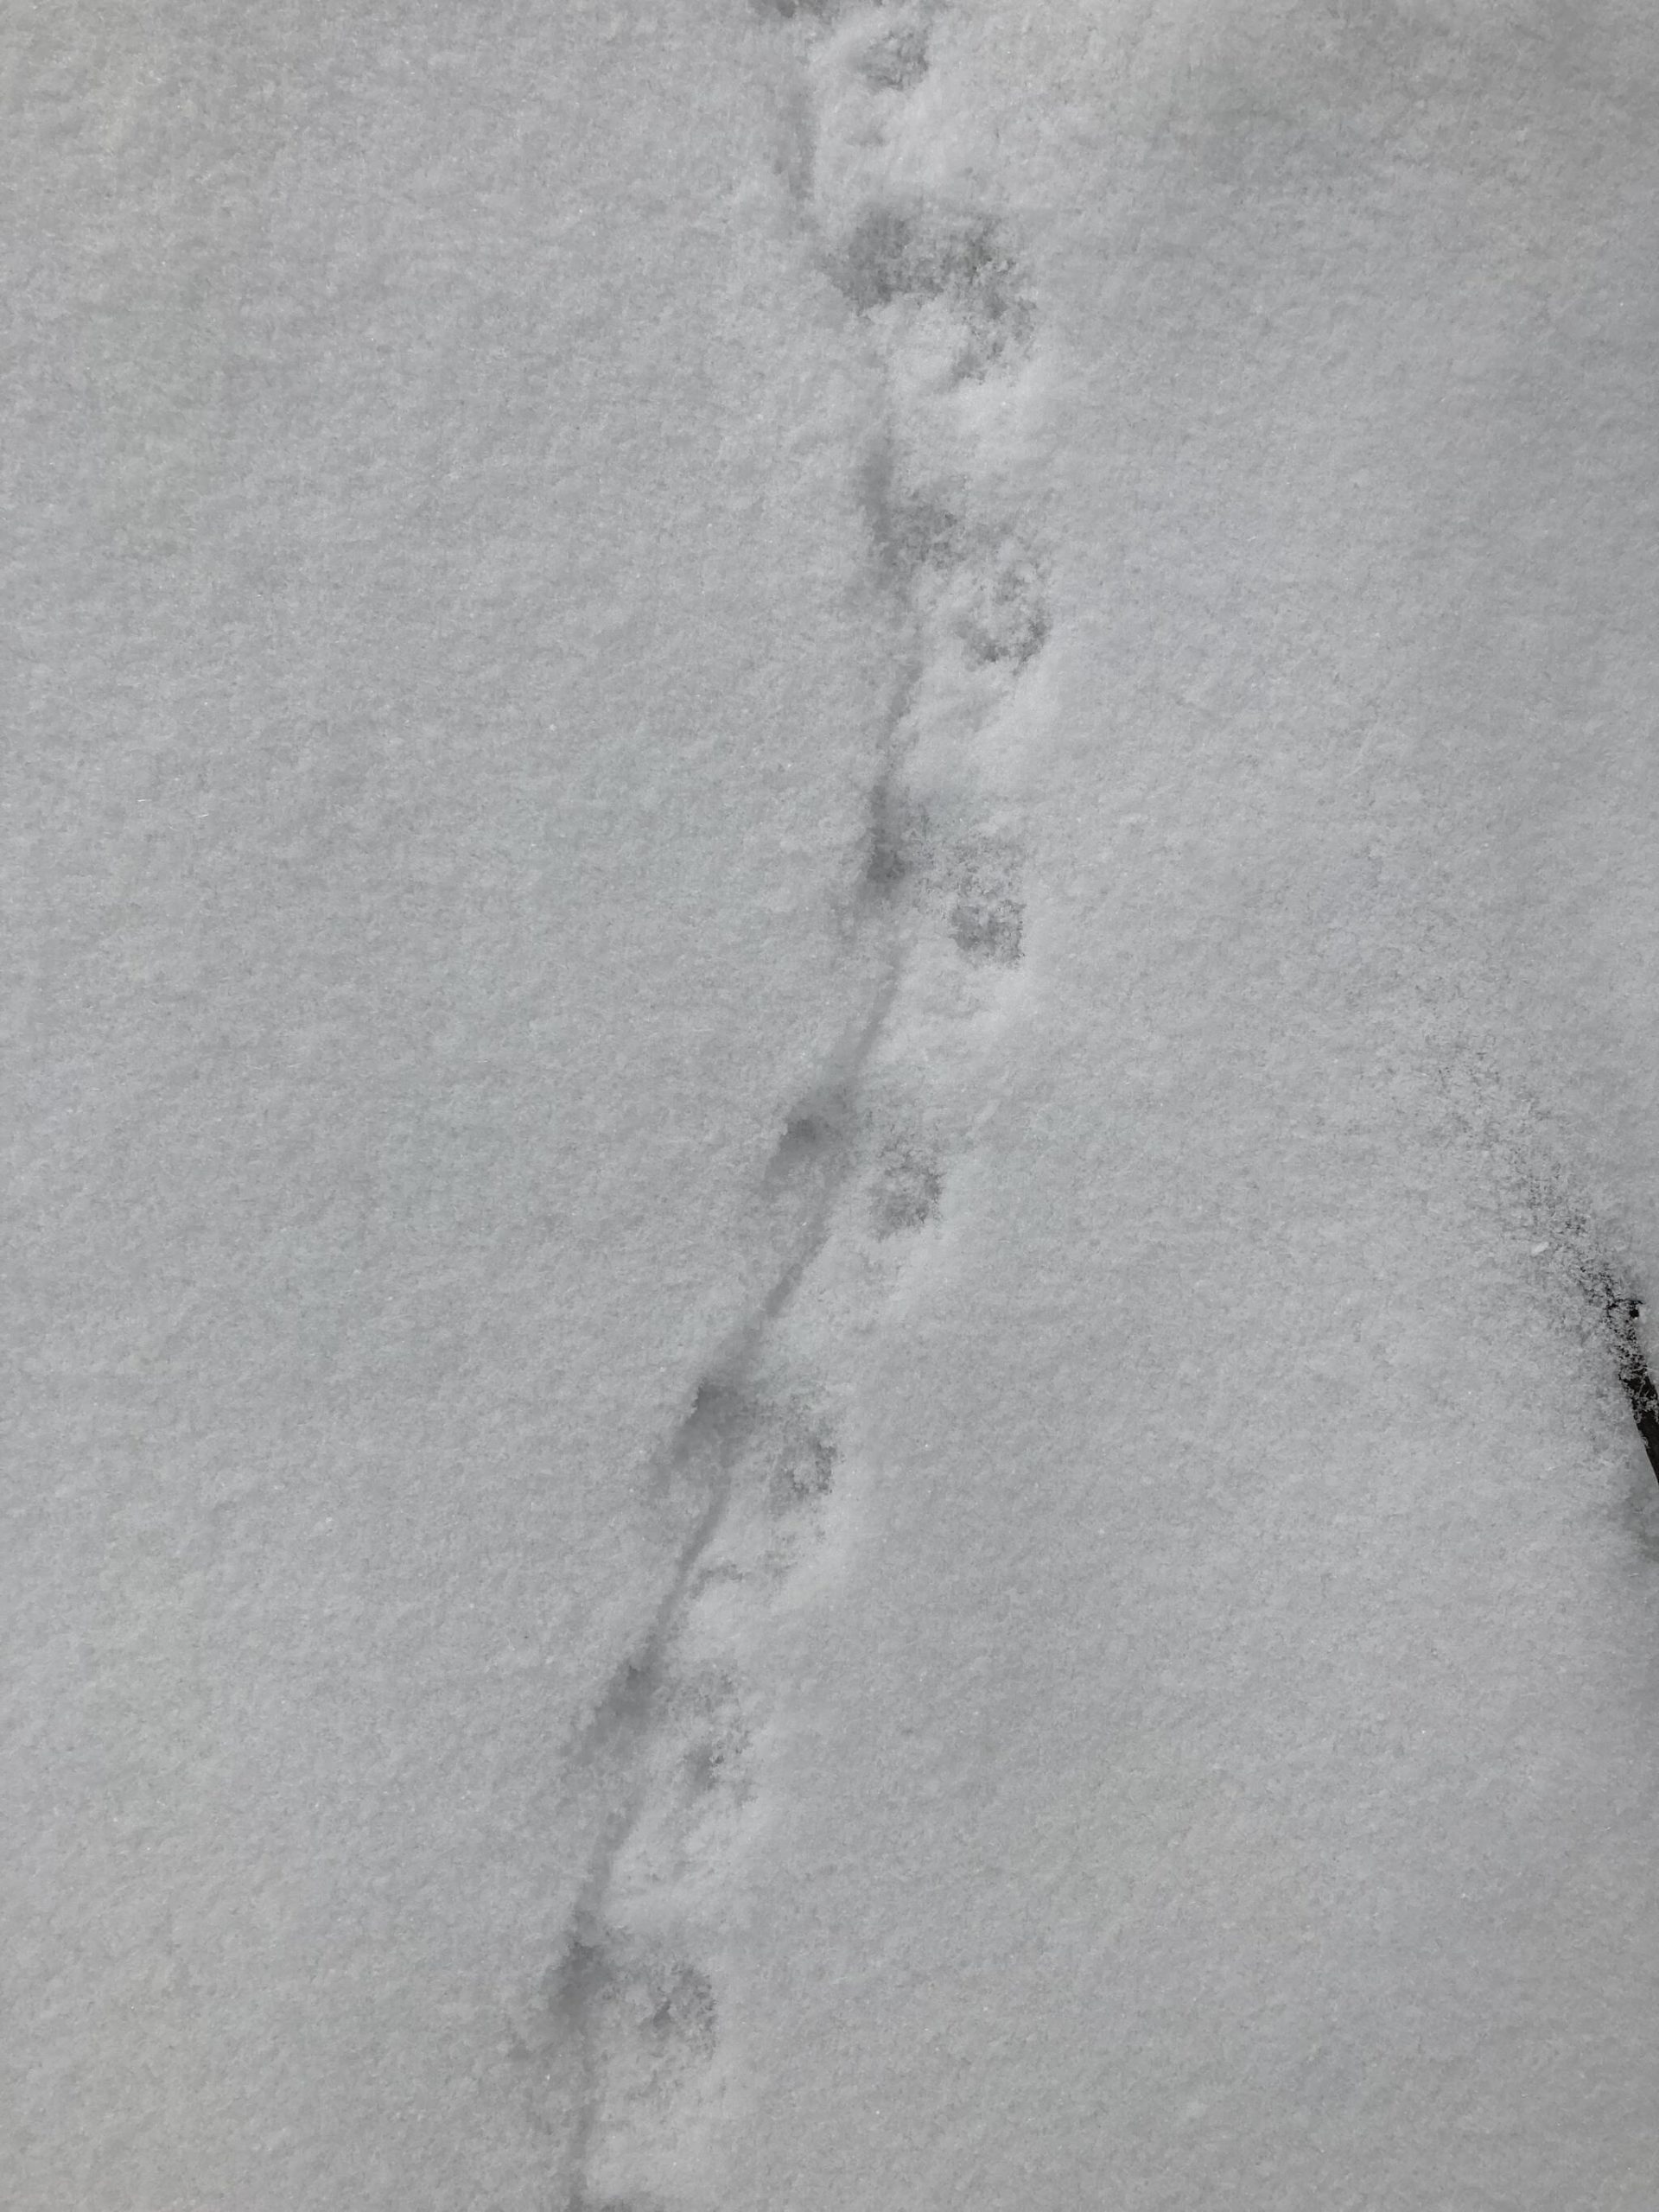 Mary F. Willson / For the Juneau Empire
A shrew left a trail as it bounded over the snow.